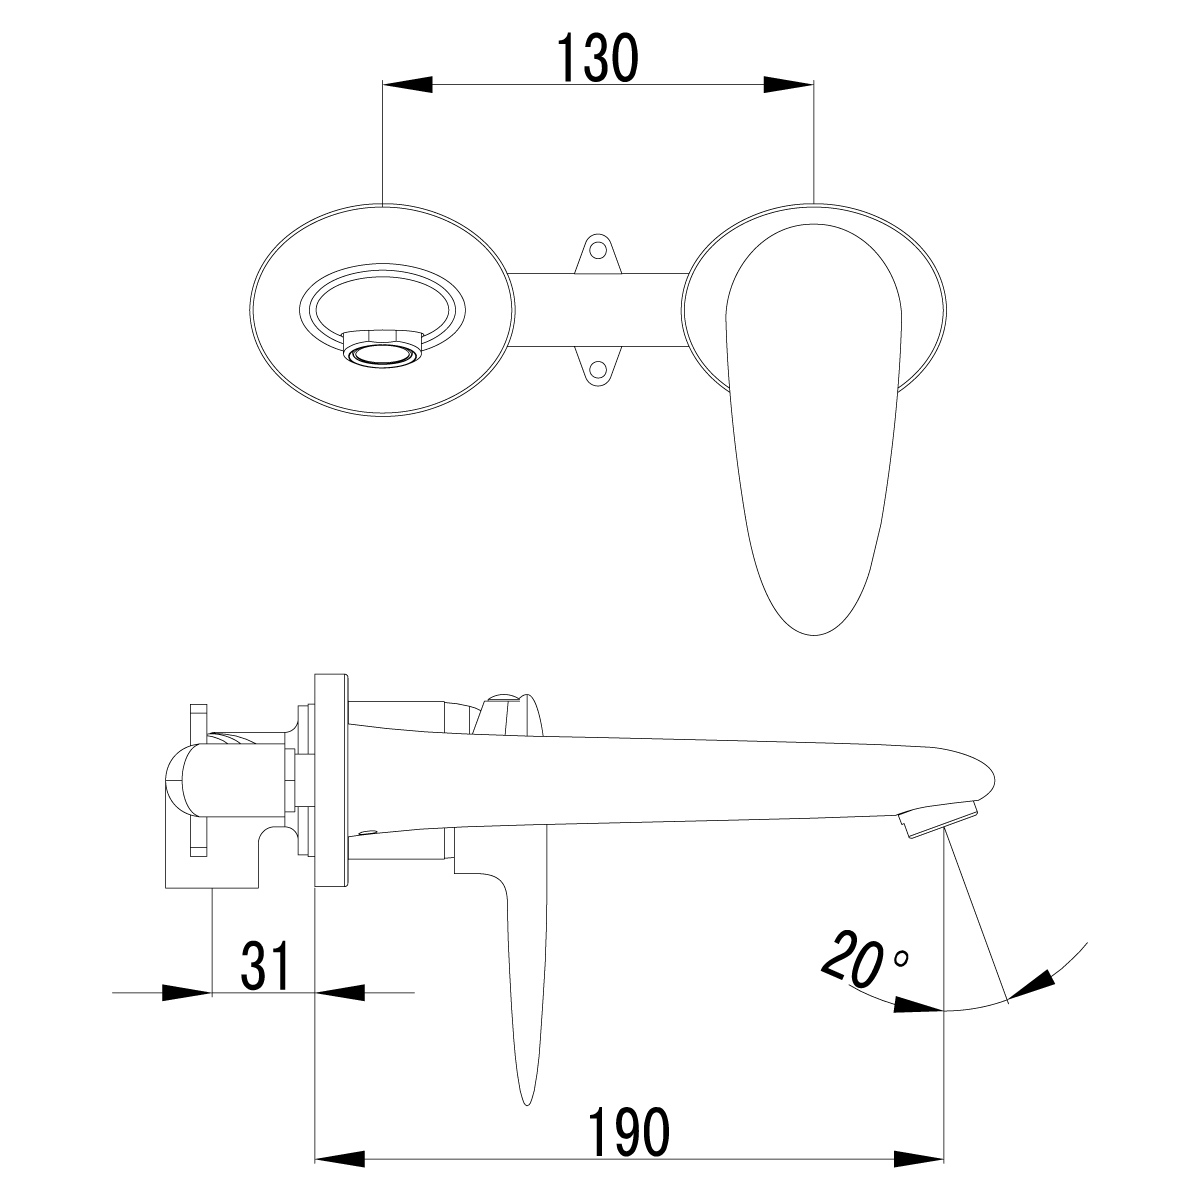 LM4426C Built-in washbasin faucet